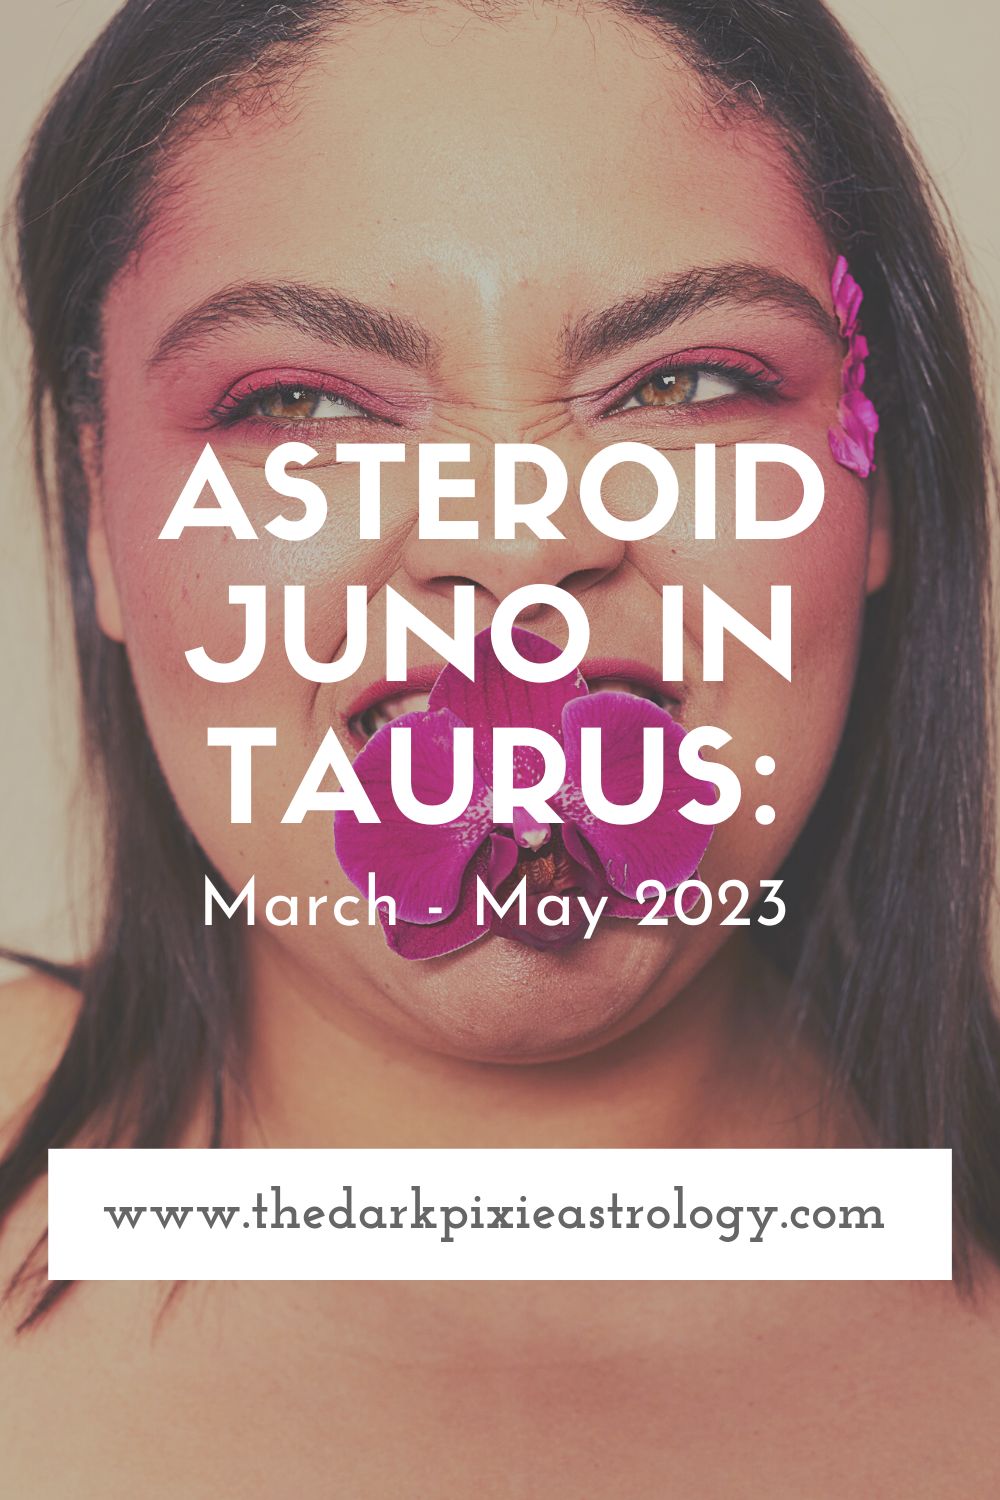 Asteroid Juno in Taurus: March - May 2023 - The Dark Pixie Astrology